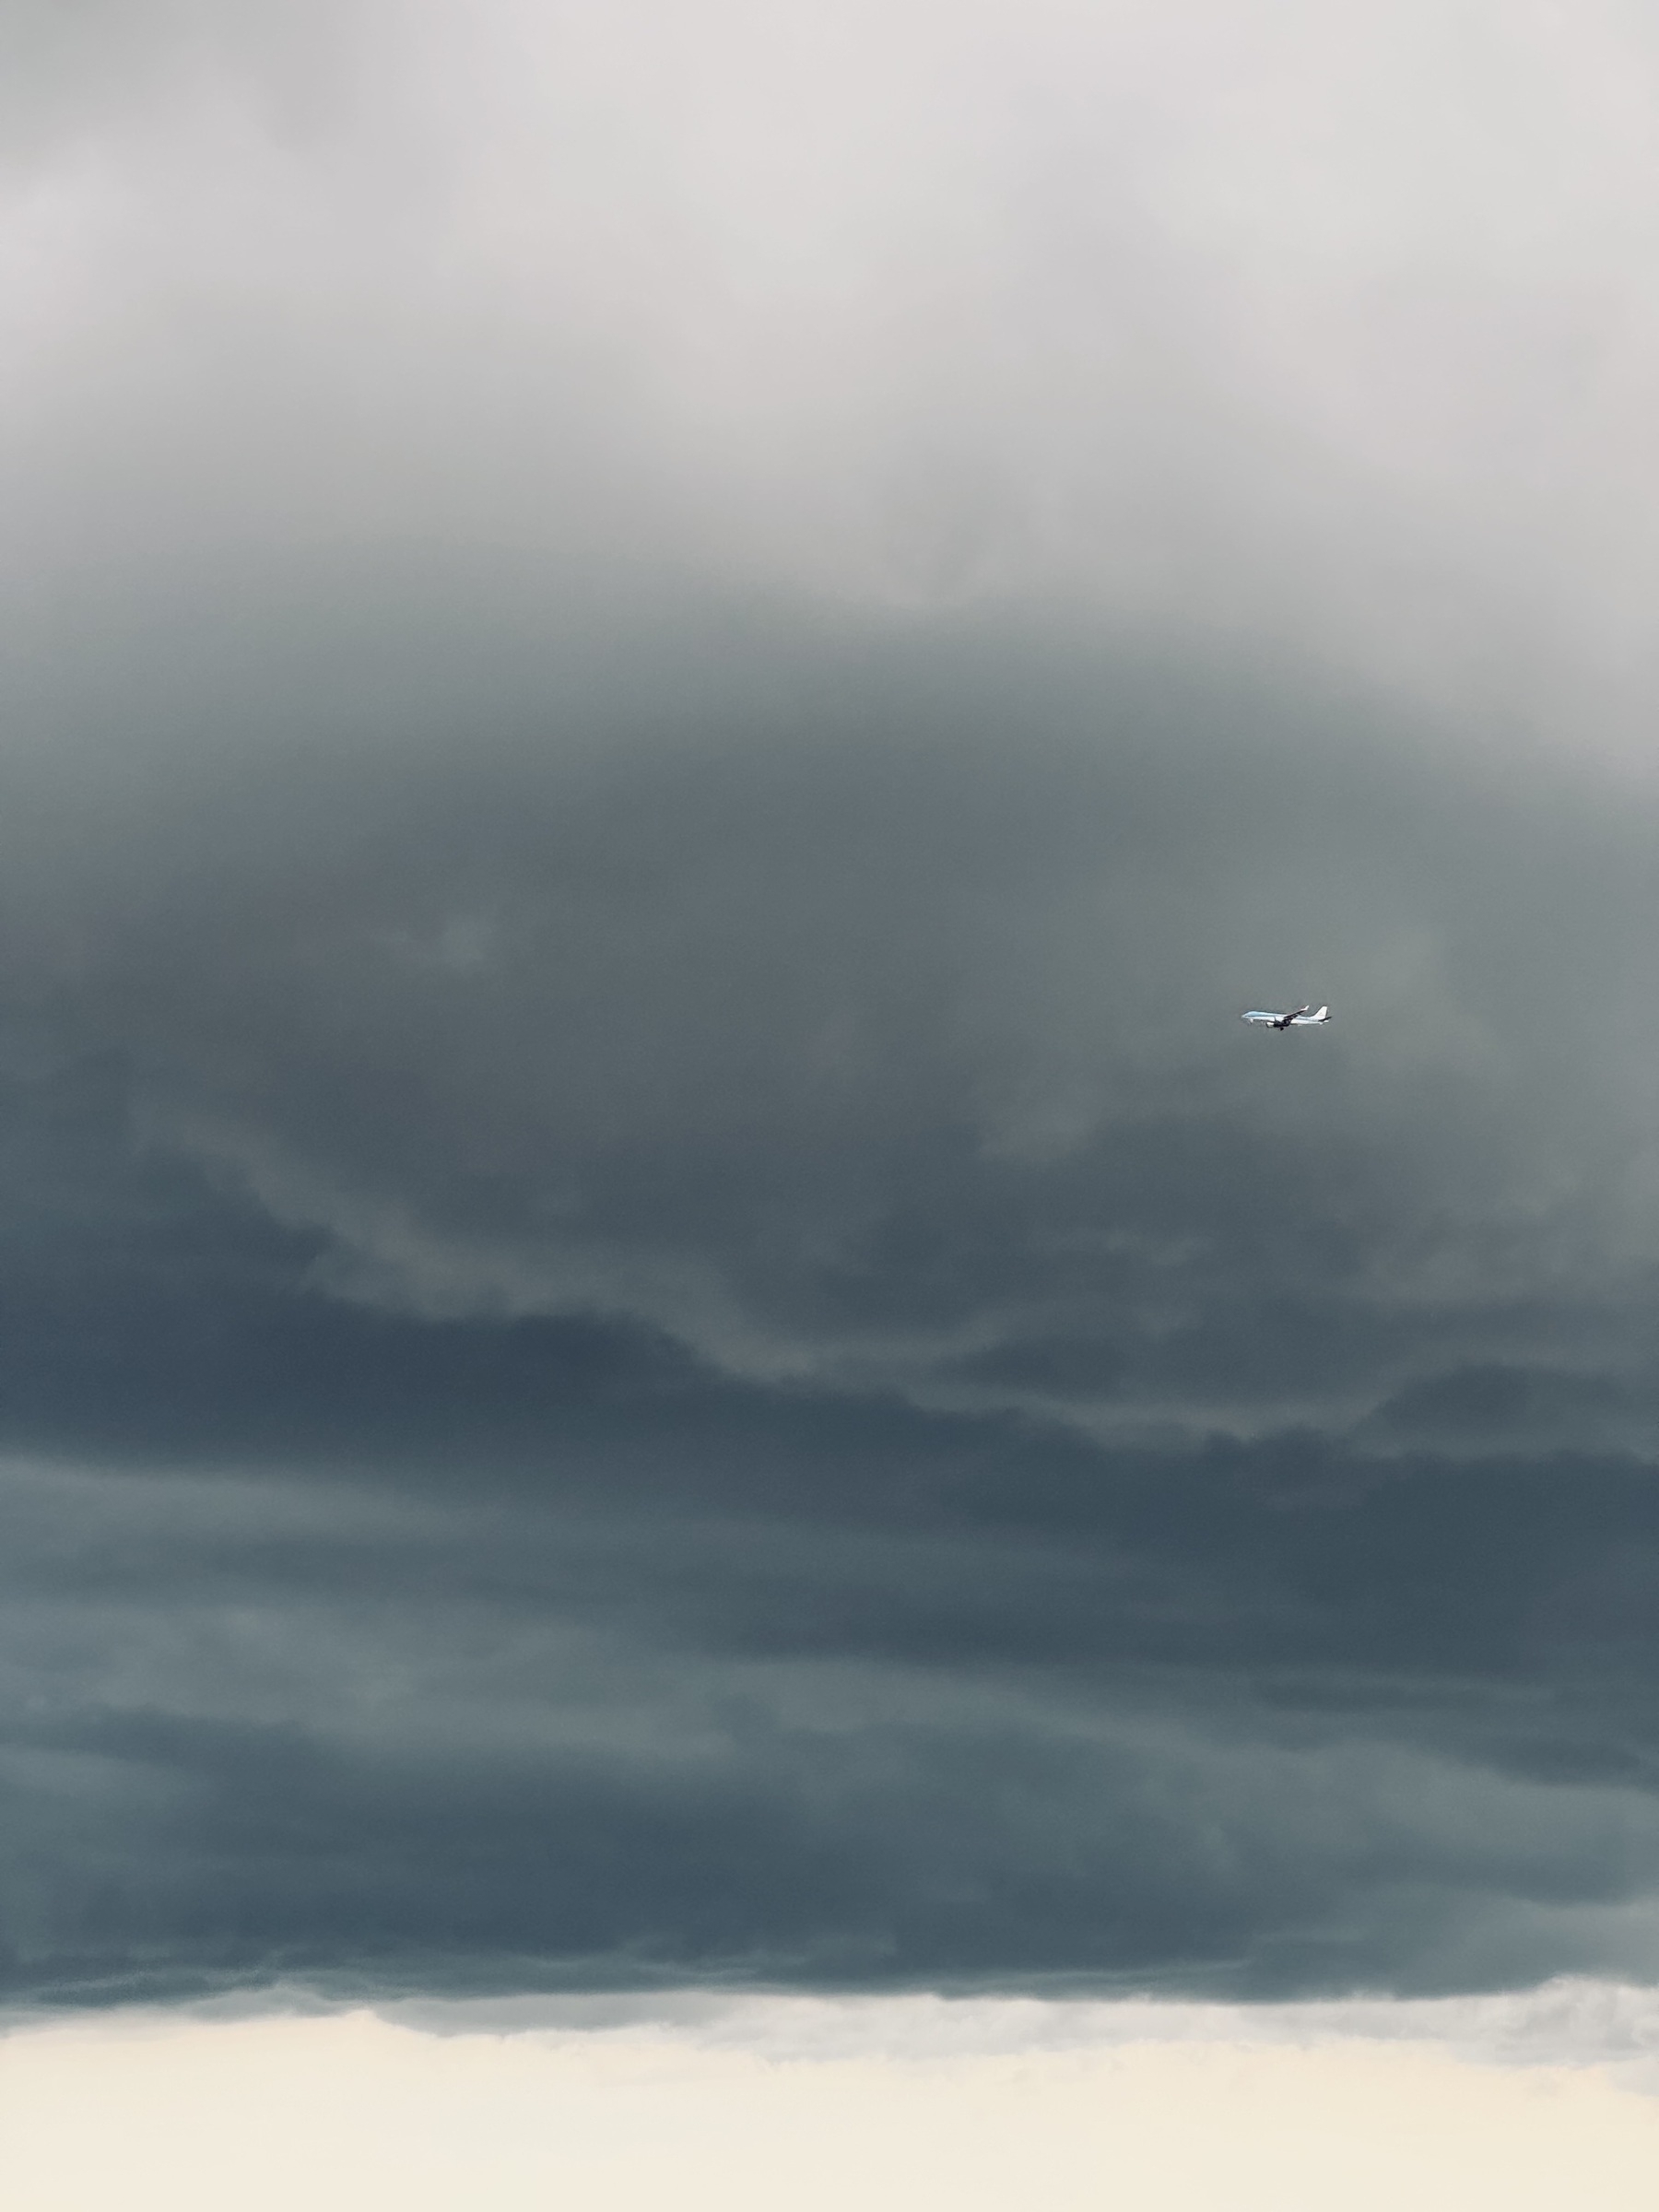 An airplane in the distance with a dark cloud behind it.